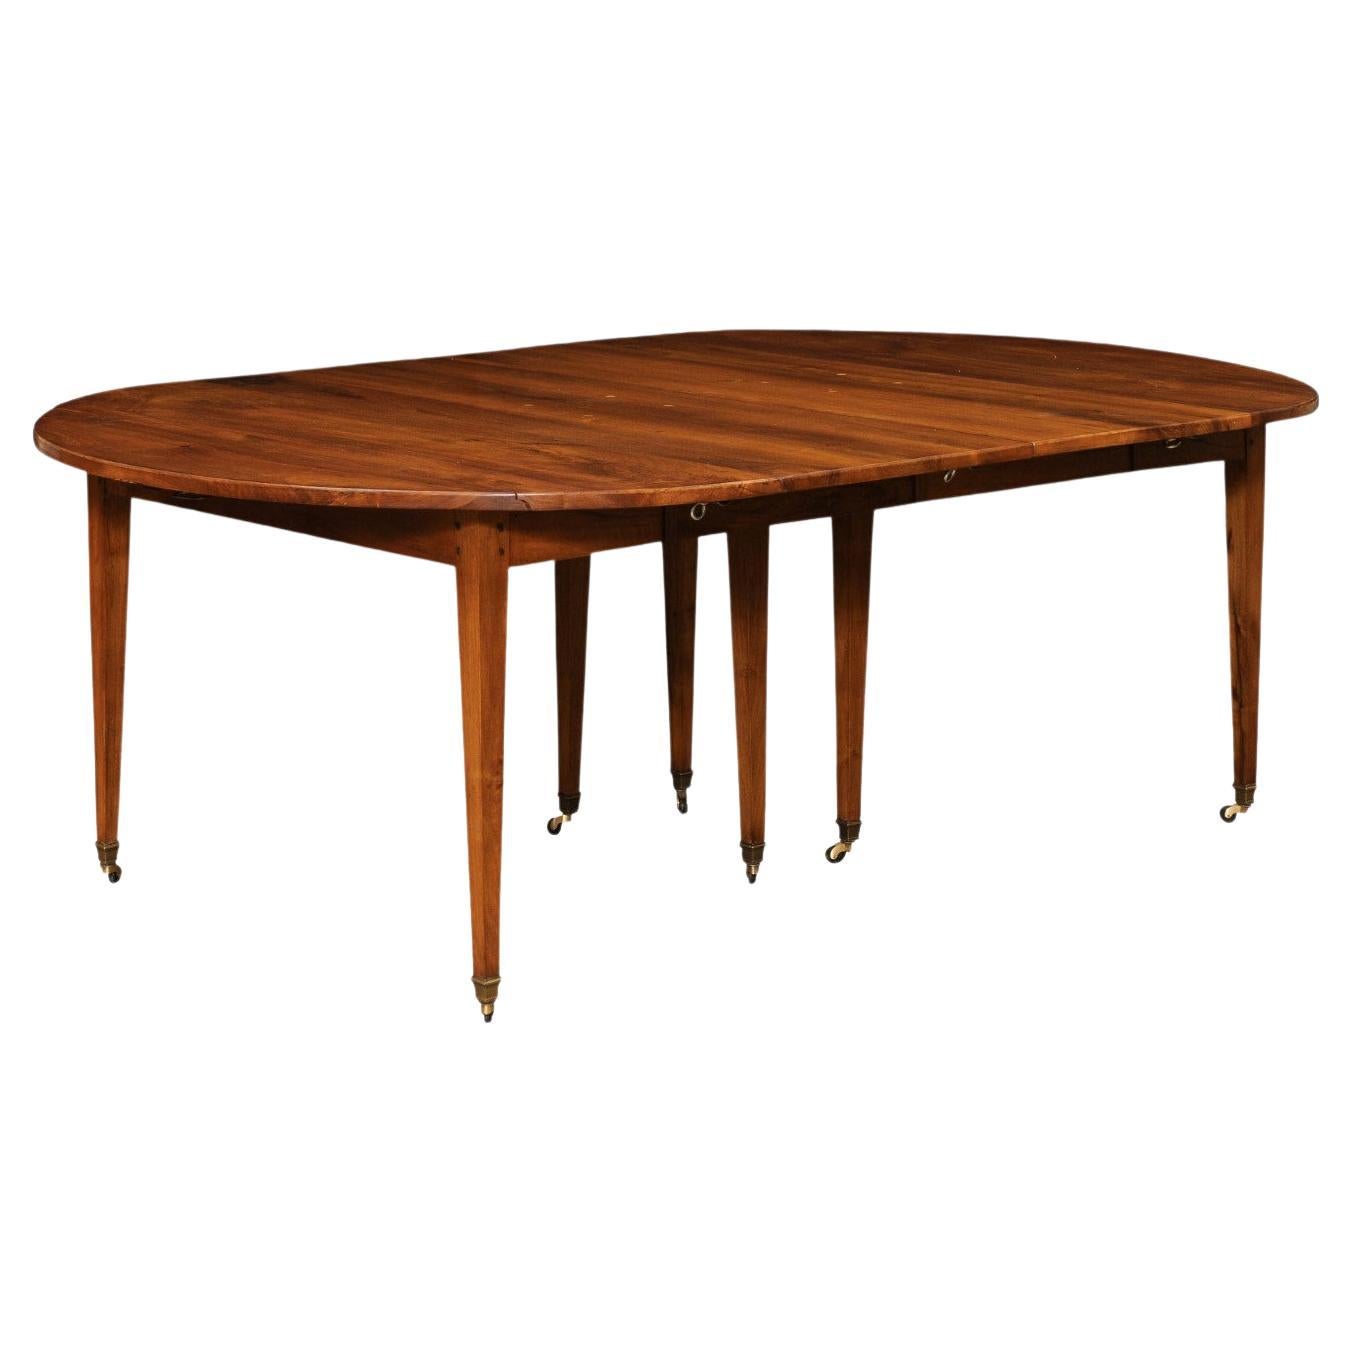 French 1890s Walnut Oval Extension Dining Room Table with Five Leaves